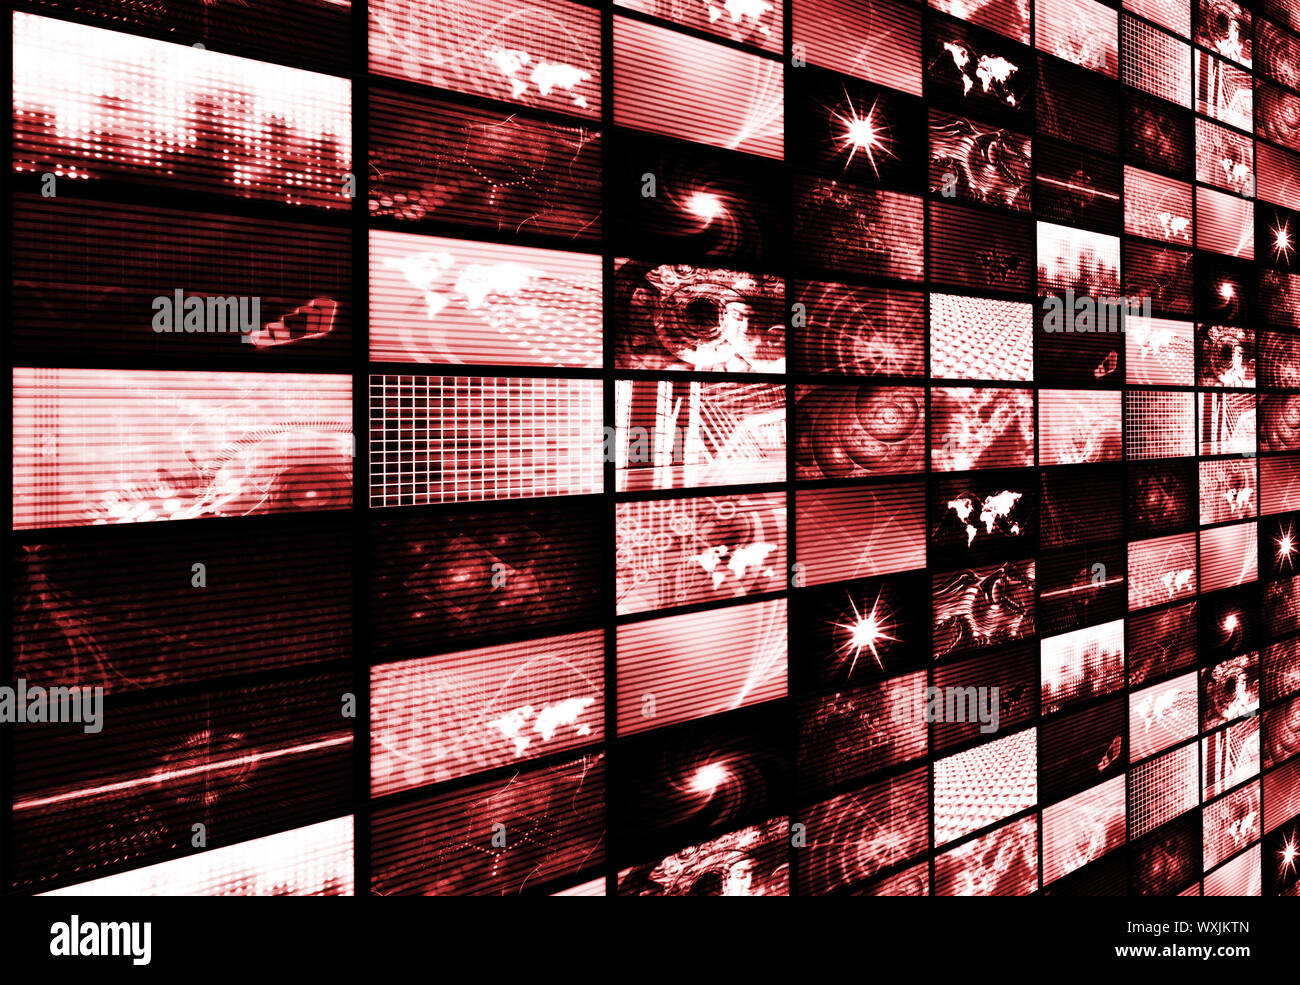 Red Futuristic Media Abstract Background Stock Photo